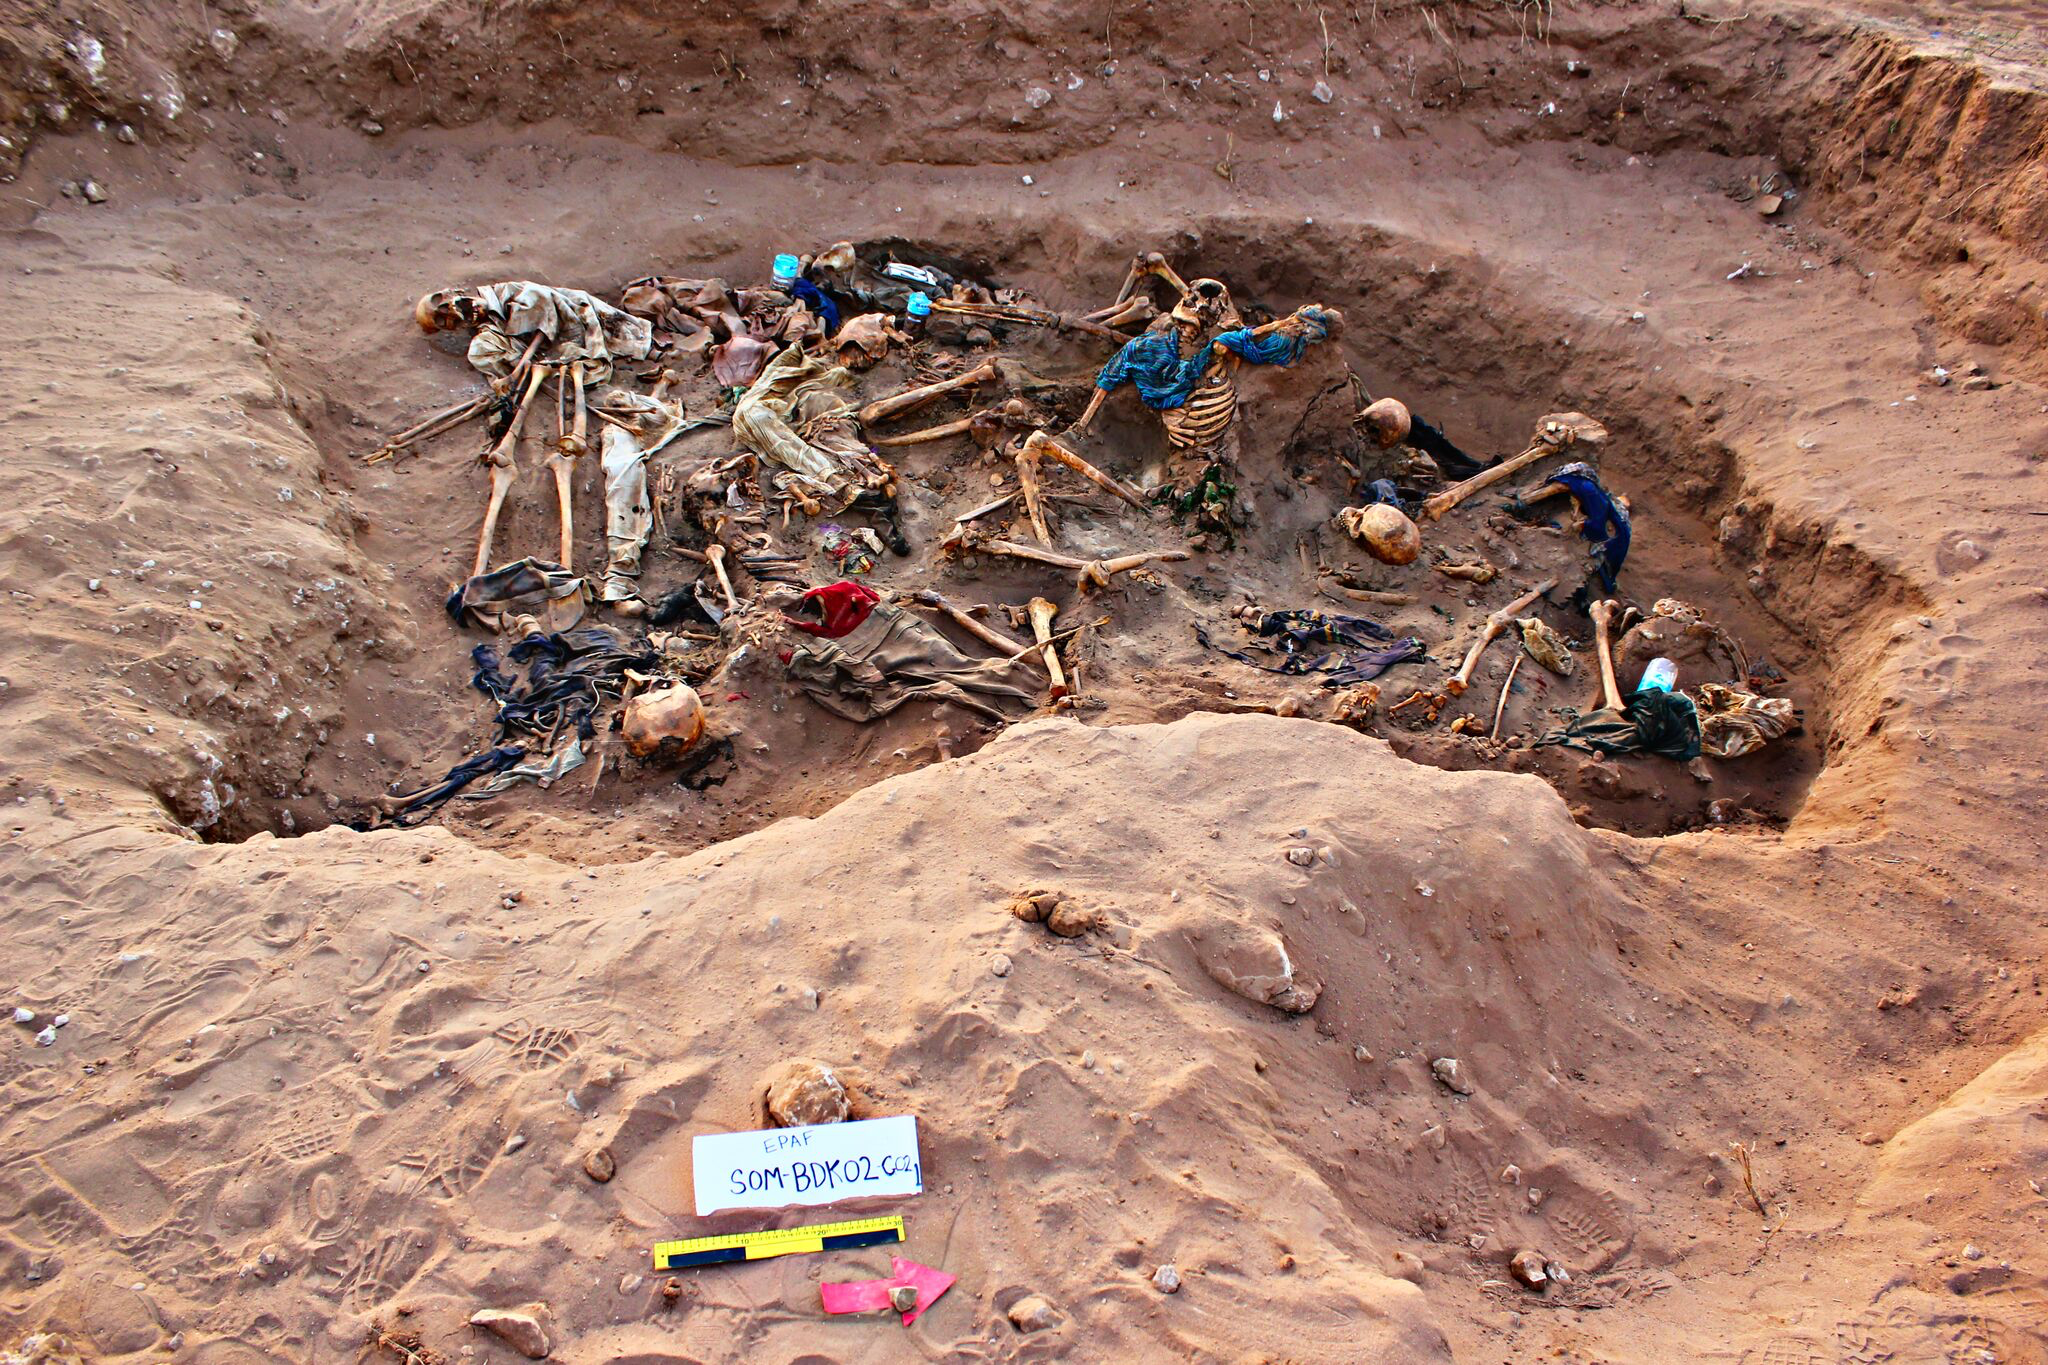 Human remains in Somaliland's Valley of Death. Photo courtesy of the Peruvian Forensic Anthropology Team (EPAF) led by Franco Mora. Somaliland, 2018.